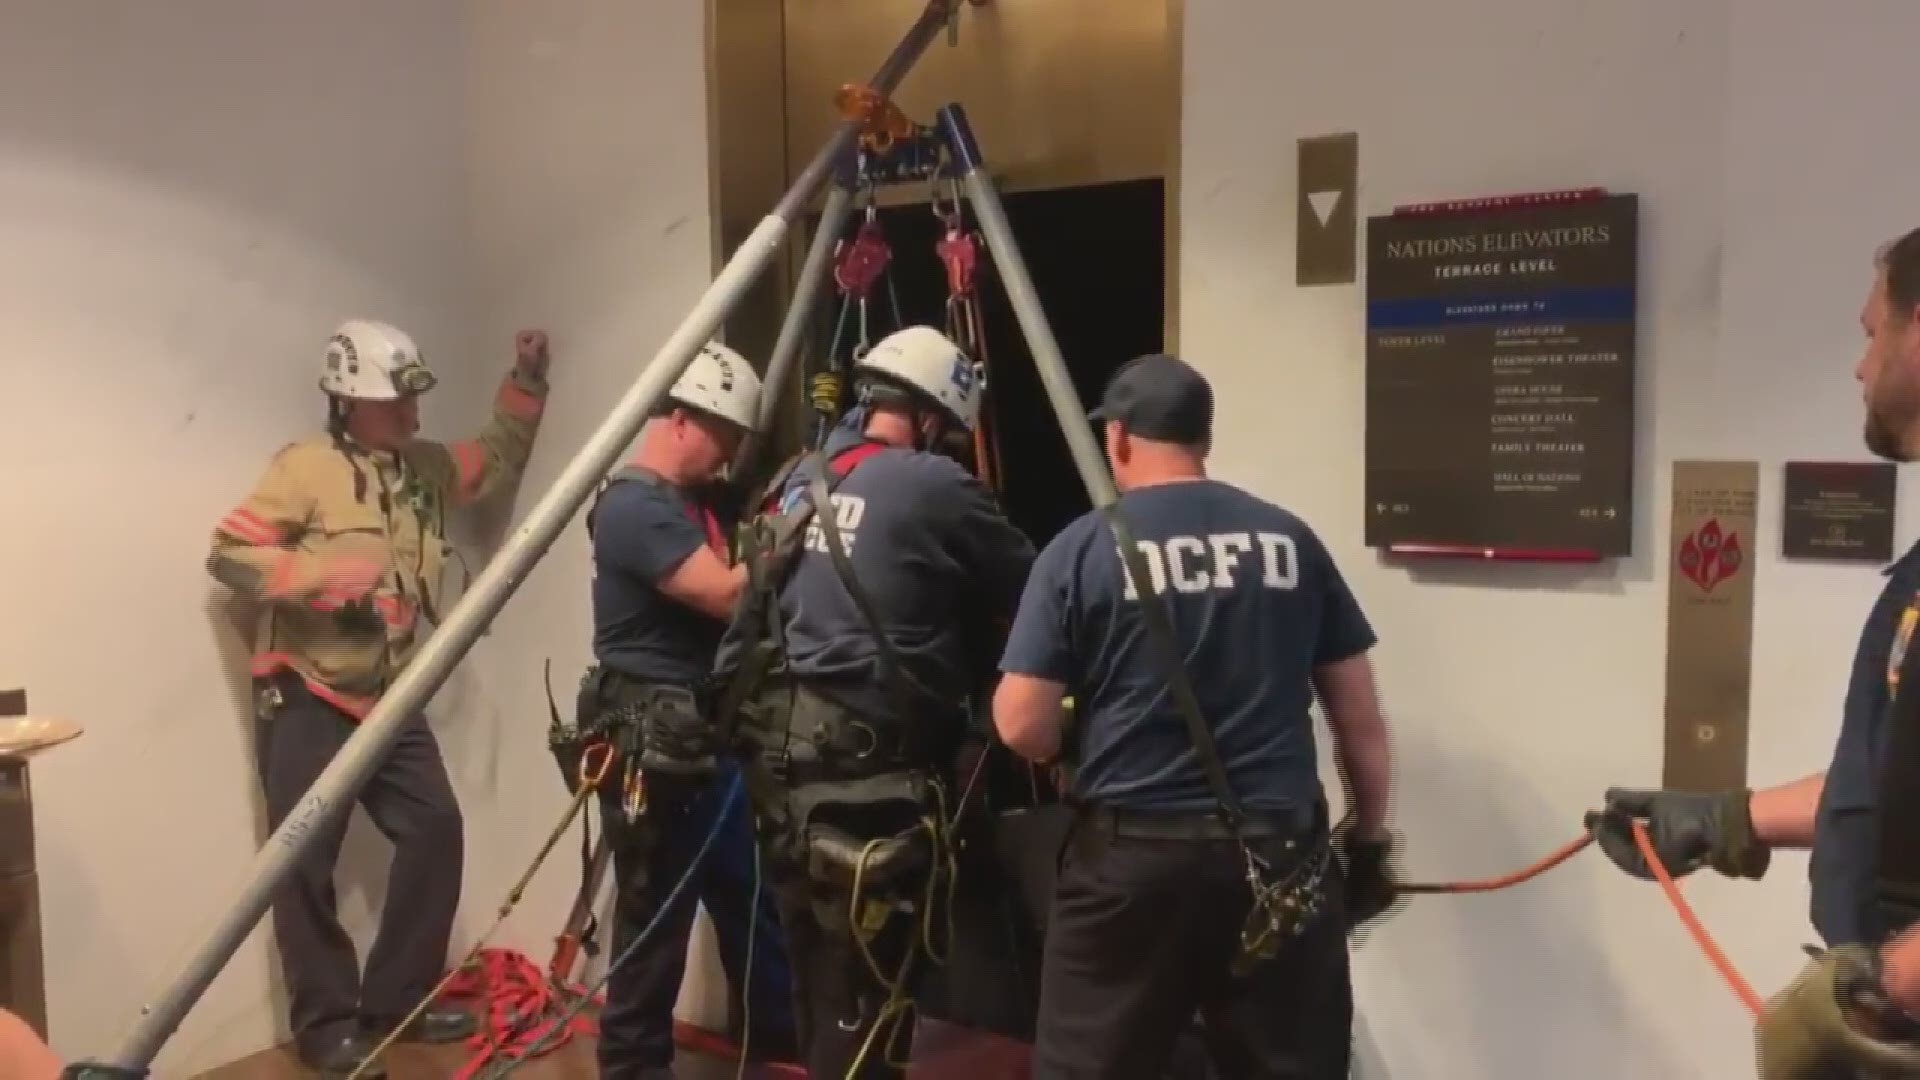 Three young adult visitors to the Kennedy Center had to be rescued from an elevator Tuesday night after it malfunctioned.